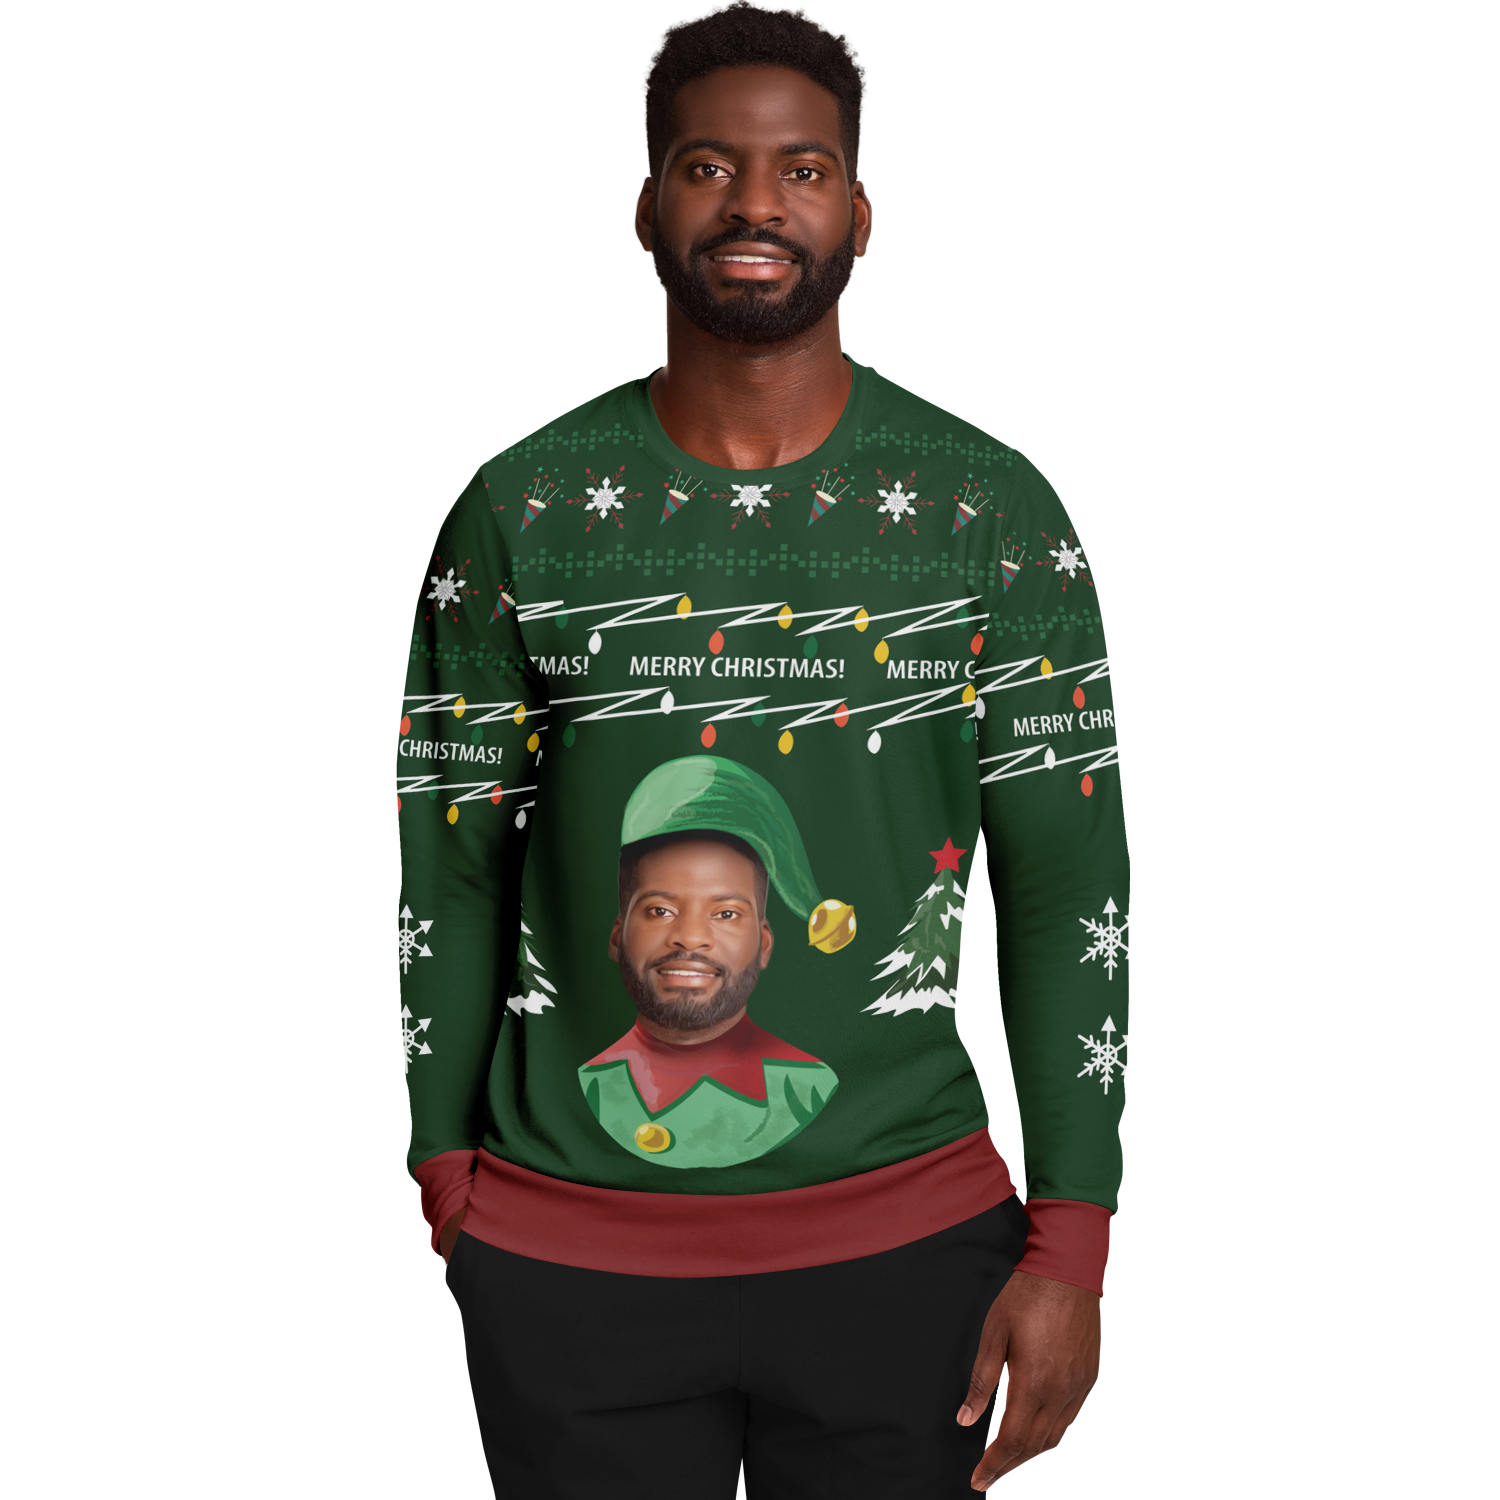 Ugly Christmas Sweater Elf (Green Male)